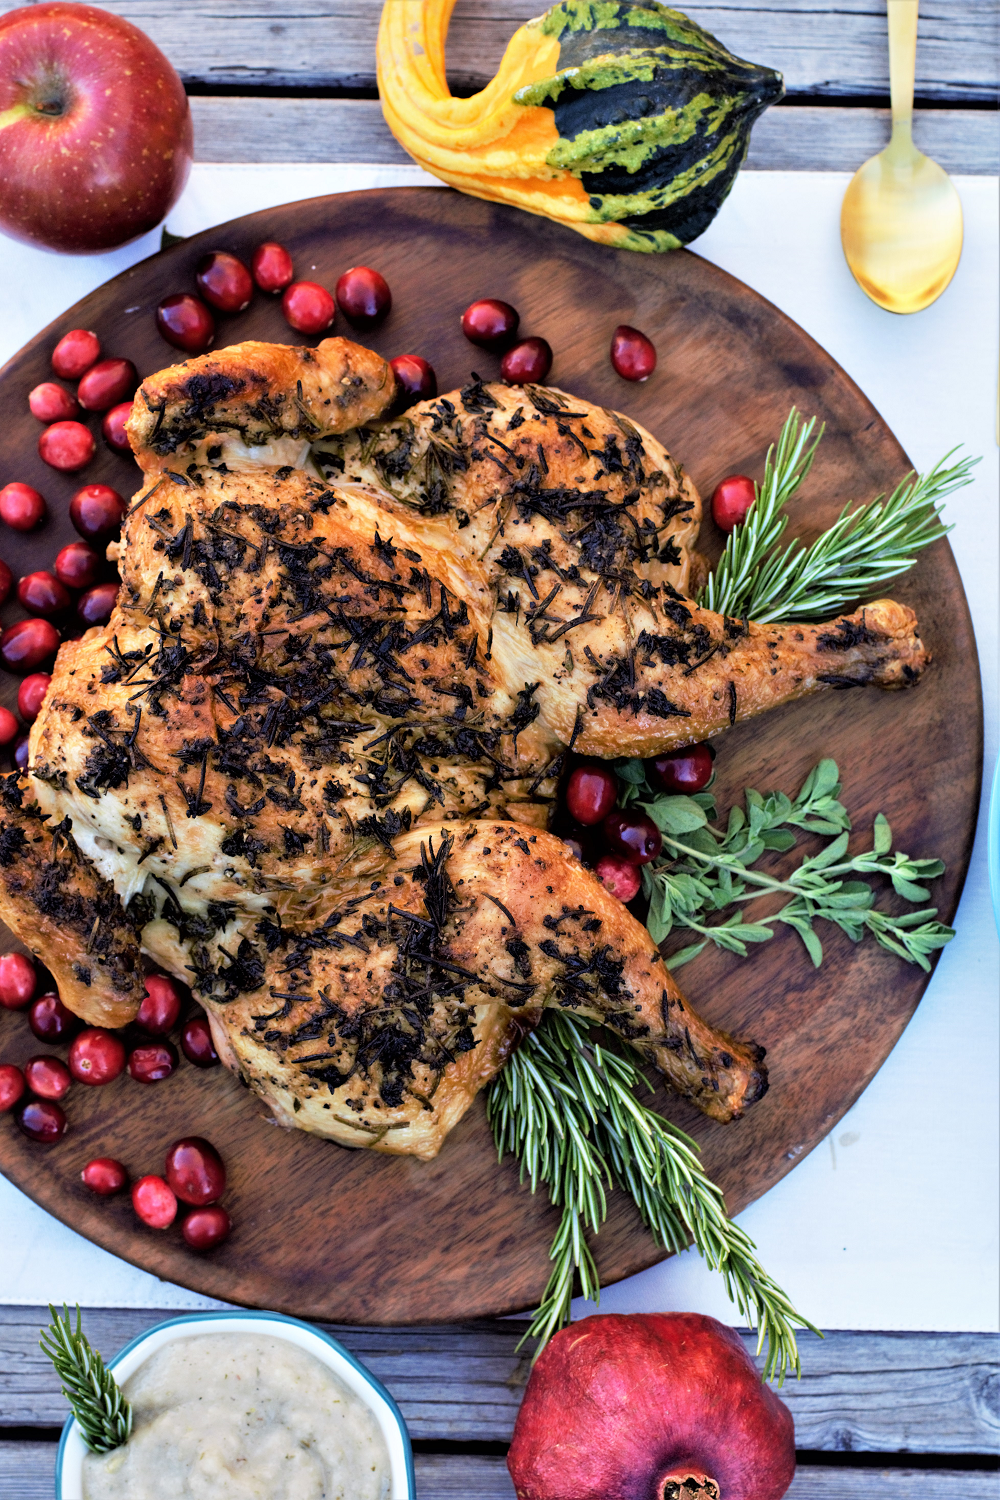 Beautifully roasted chicken is an impressive centerpiece that won't leave you with leftovers for weeks - and you'll learn how to make a classic!